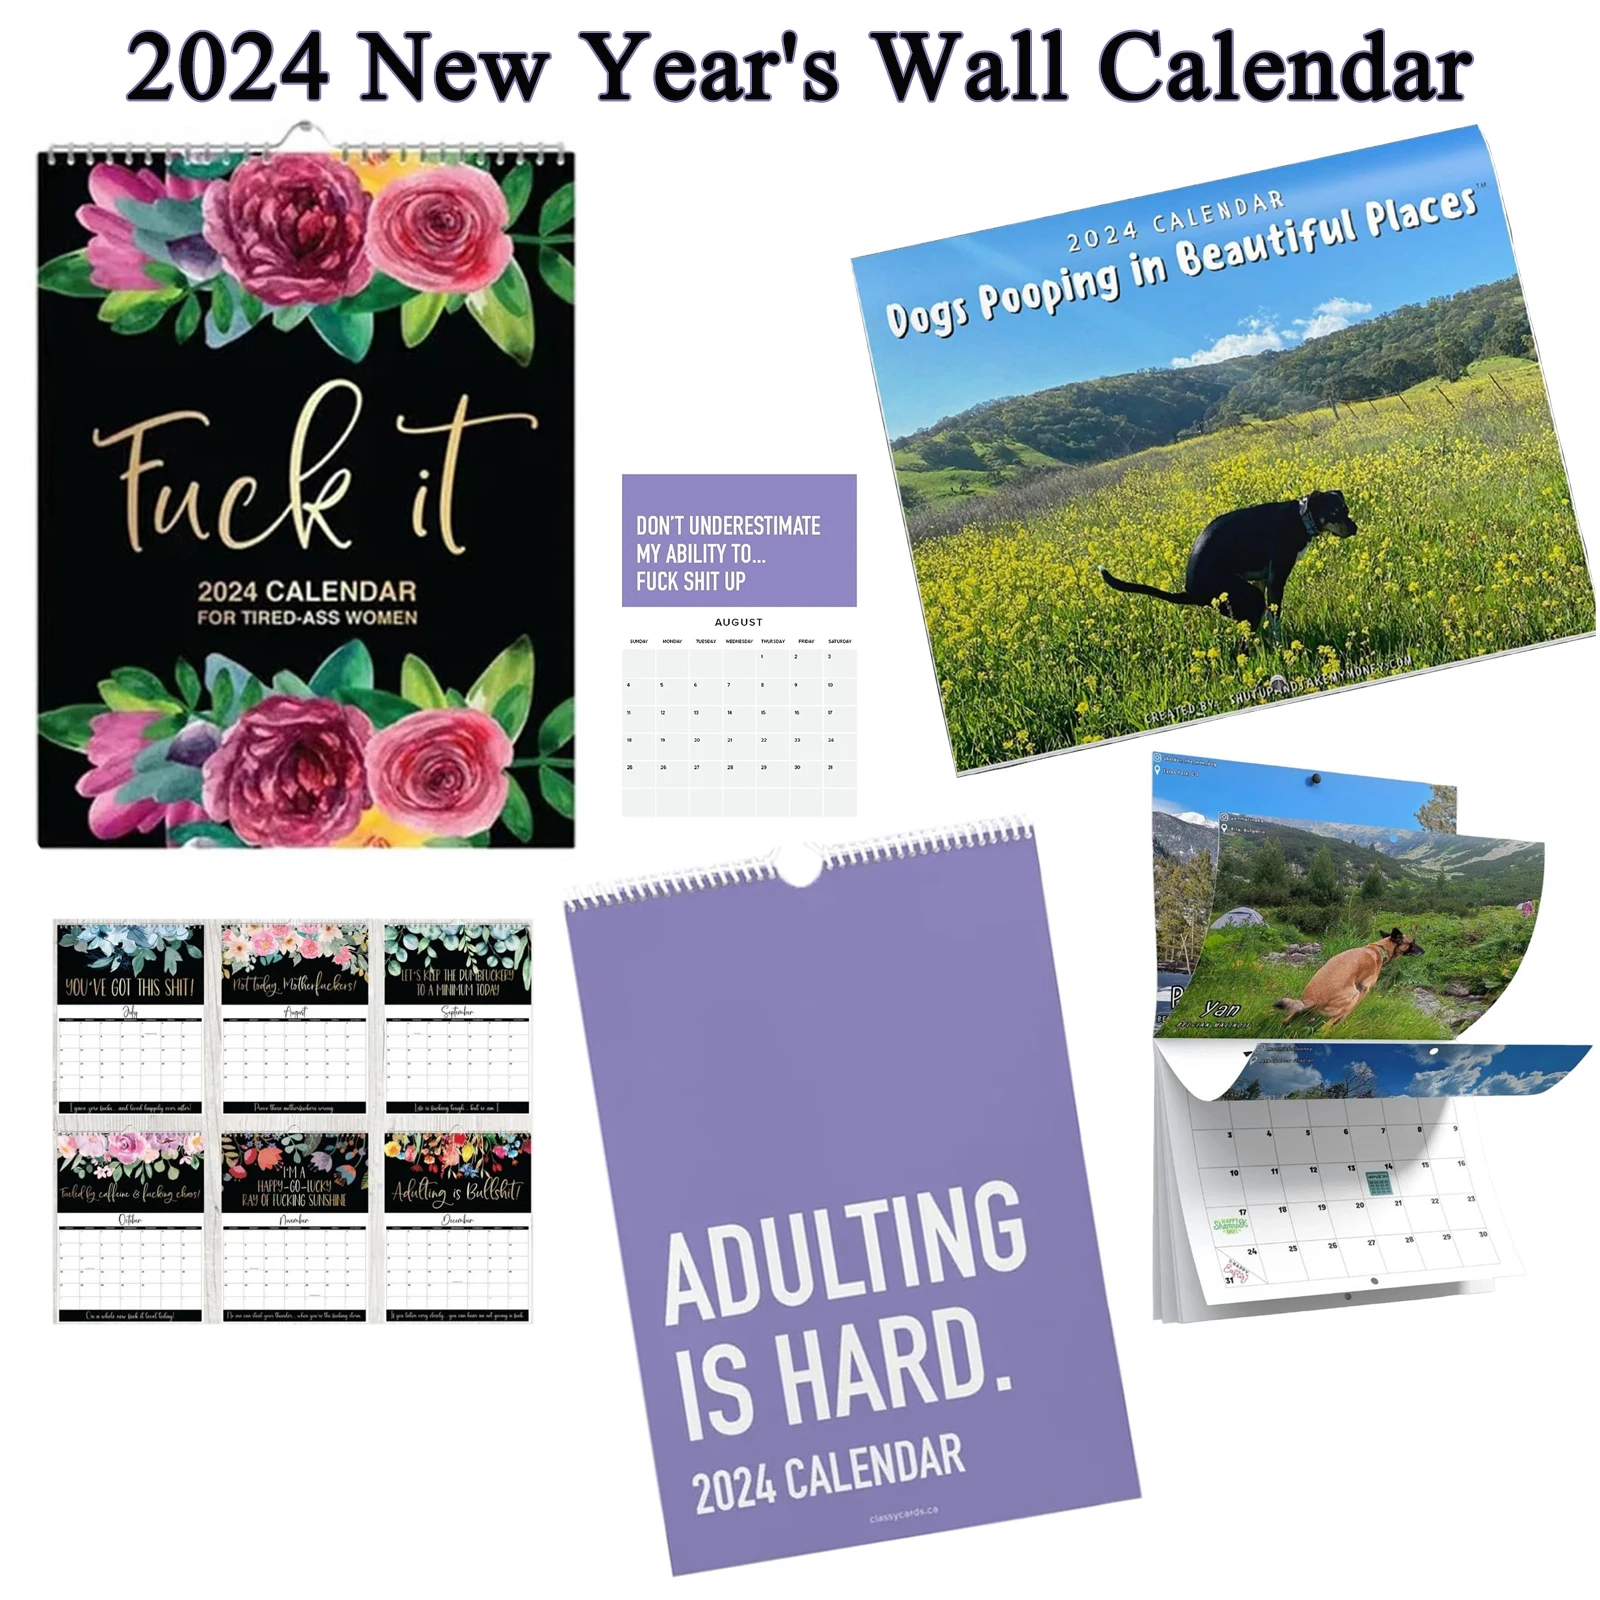 Monthly Wall Calendar 2024 Funny Dog Pooping Calendar Gift Flowers Hanging Calendar Time Planning New Year Home Indoor Decor monthly wall calendar 2024 funny dog pooping calendar gift flowers hanging calendar time planning new year home indoor decor